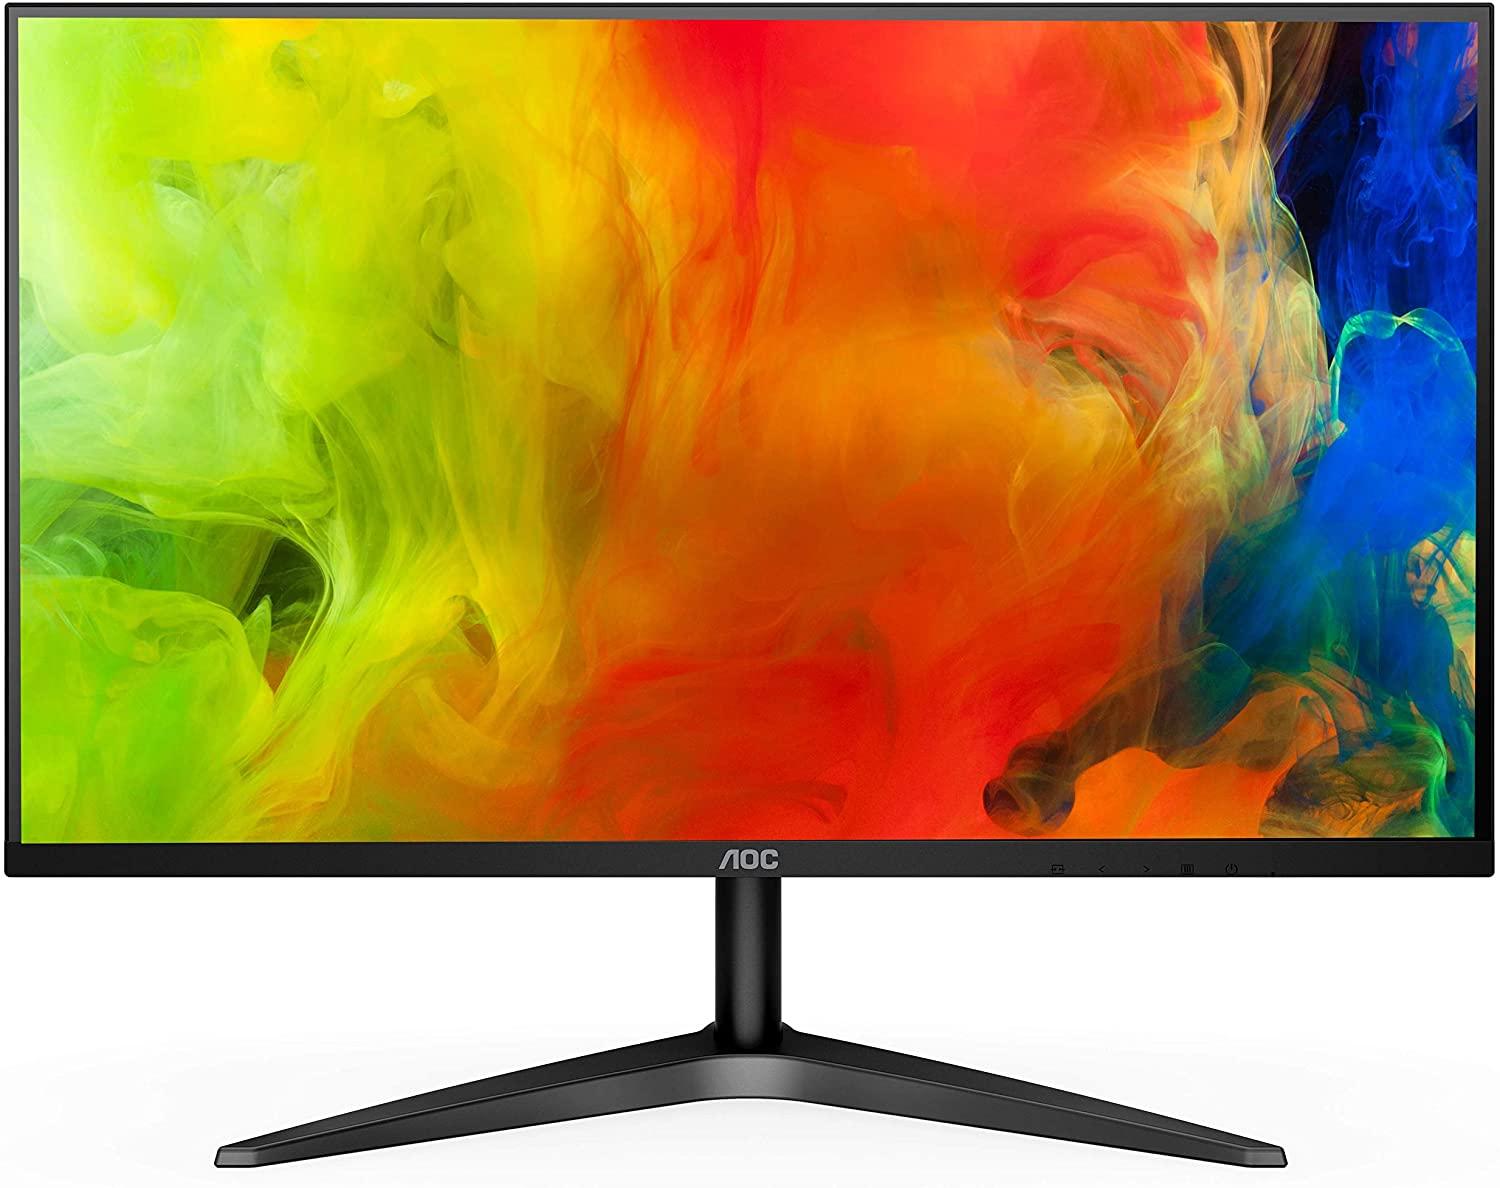 24in AOC 24B1H 1920x1080 LCD Monitor for $80 Shipped